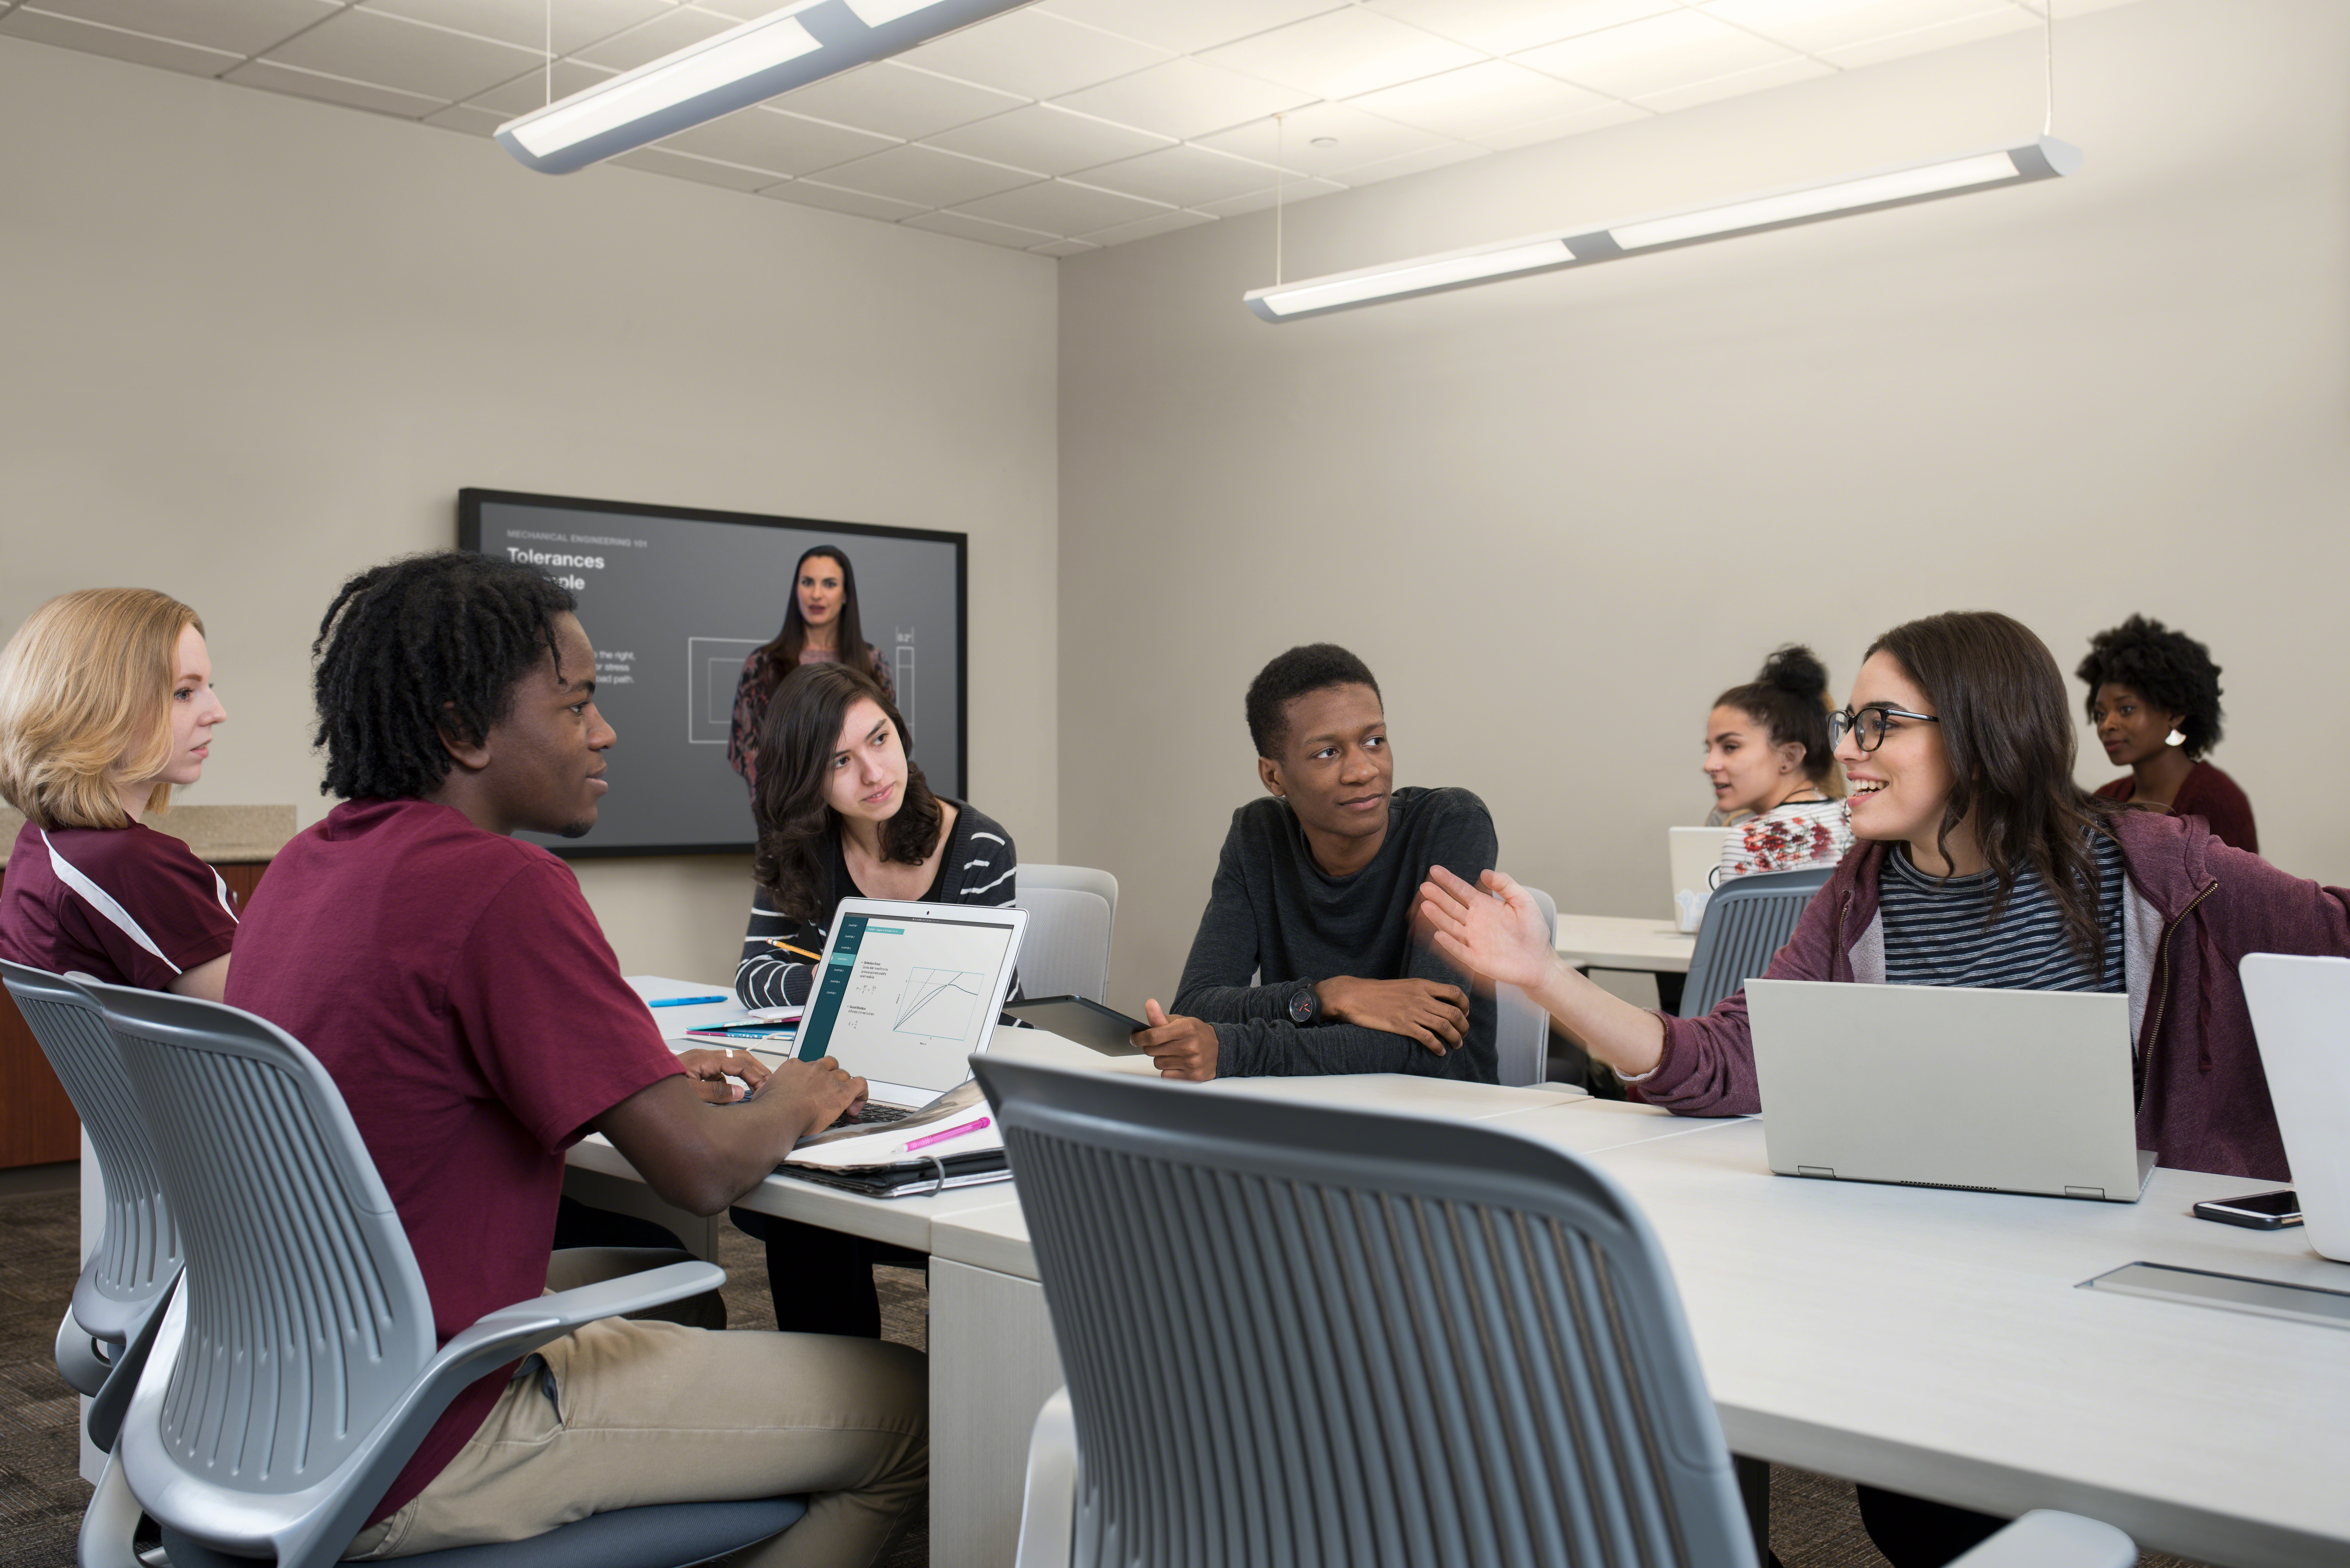 Students-explore-ThinkHub-Connect-Active-Learning-Technology-at-Texas-A&M-University